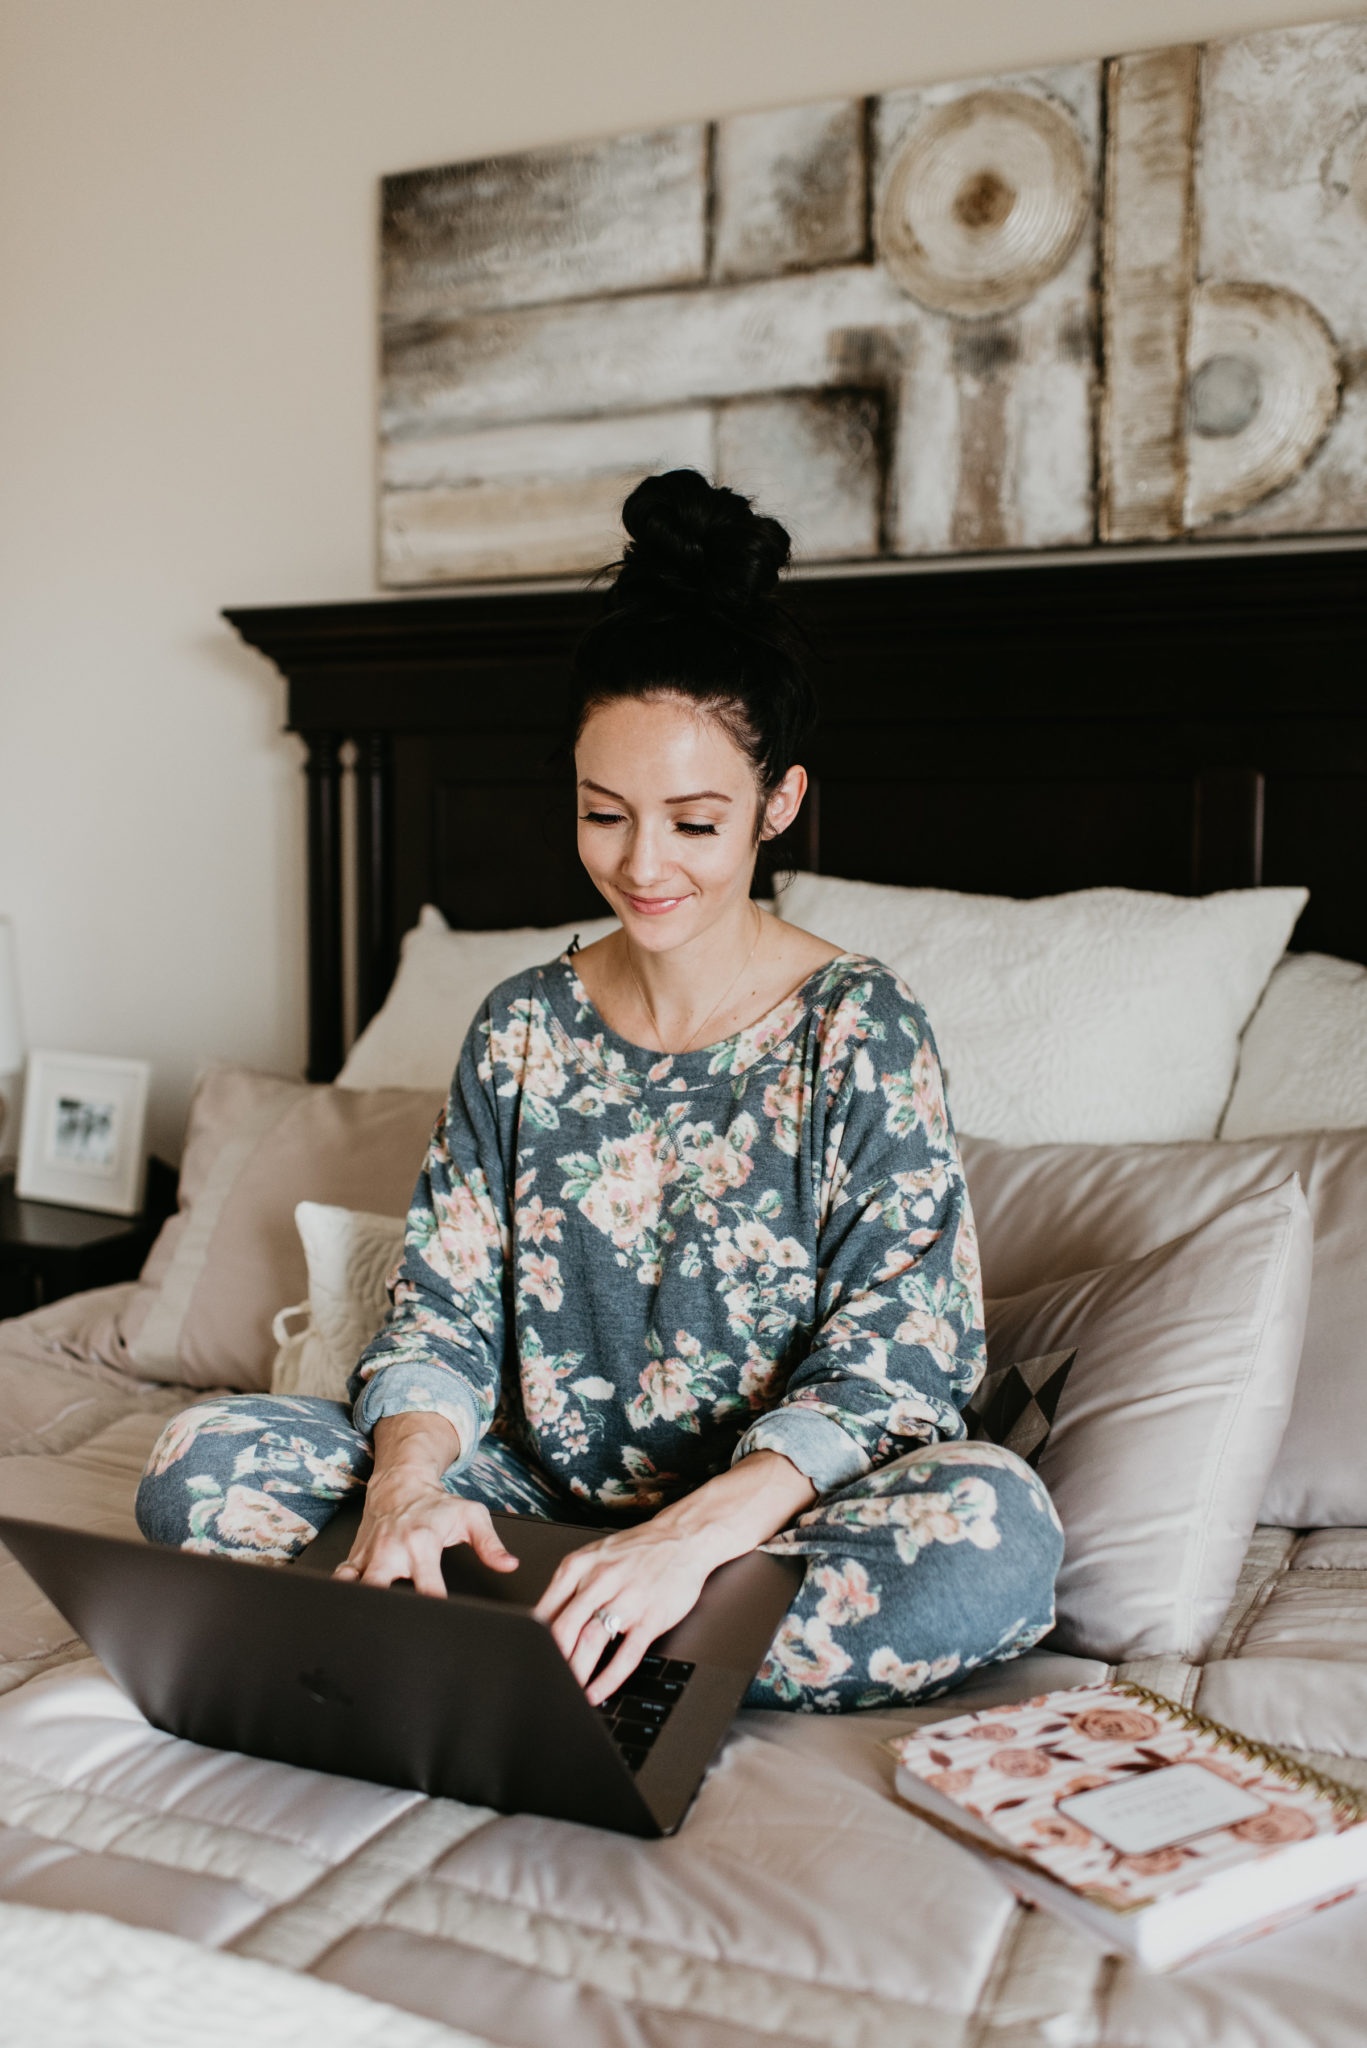 5 Planner Organization Tips for a Successful Year by popular Las Vegas lifestyle blogger Outfits & Outings: image of a woman working on her laptop